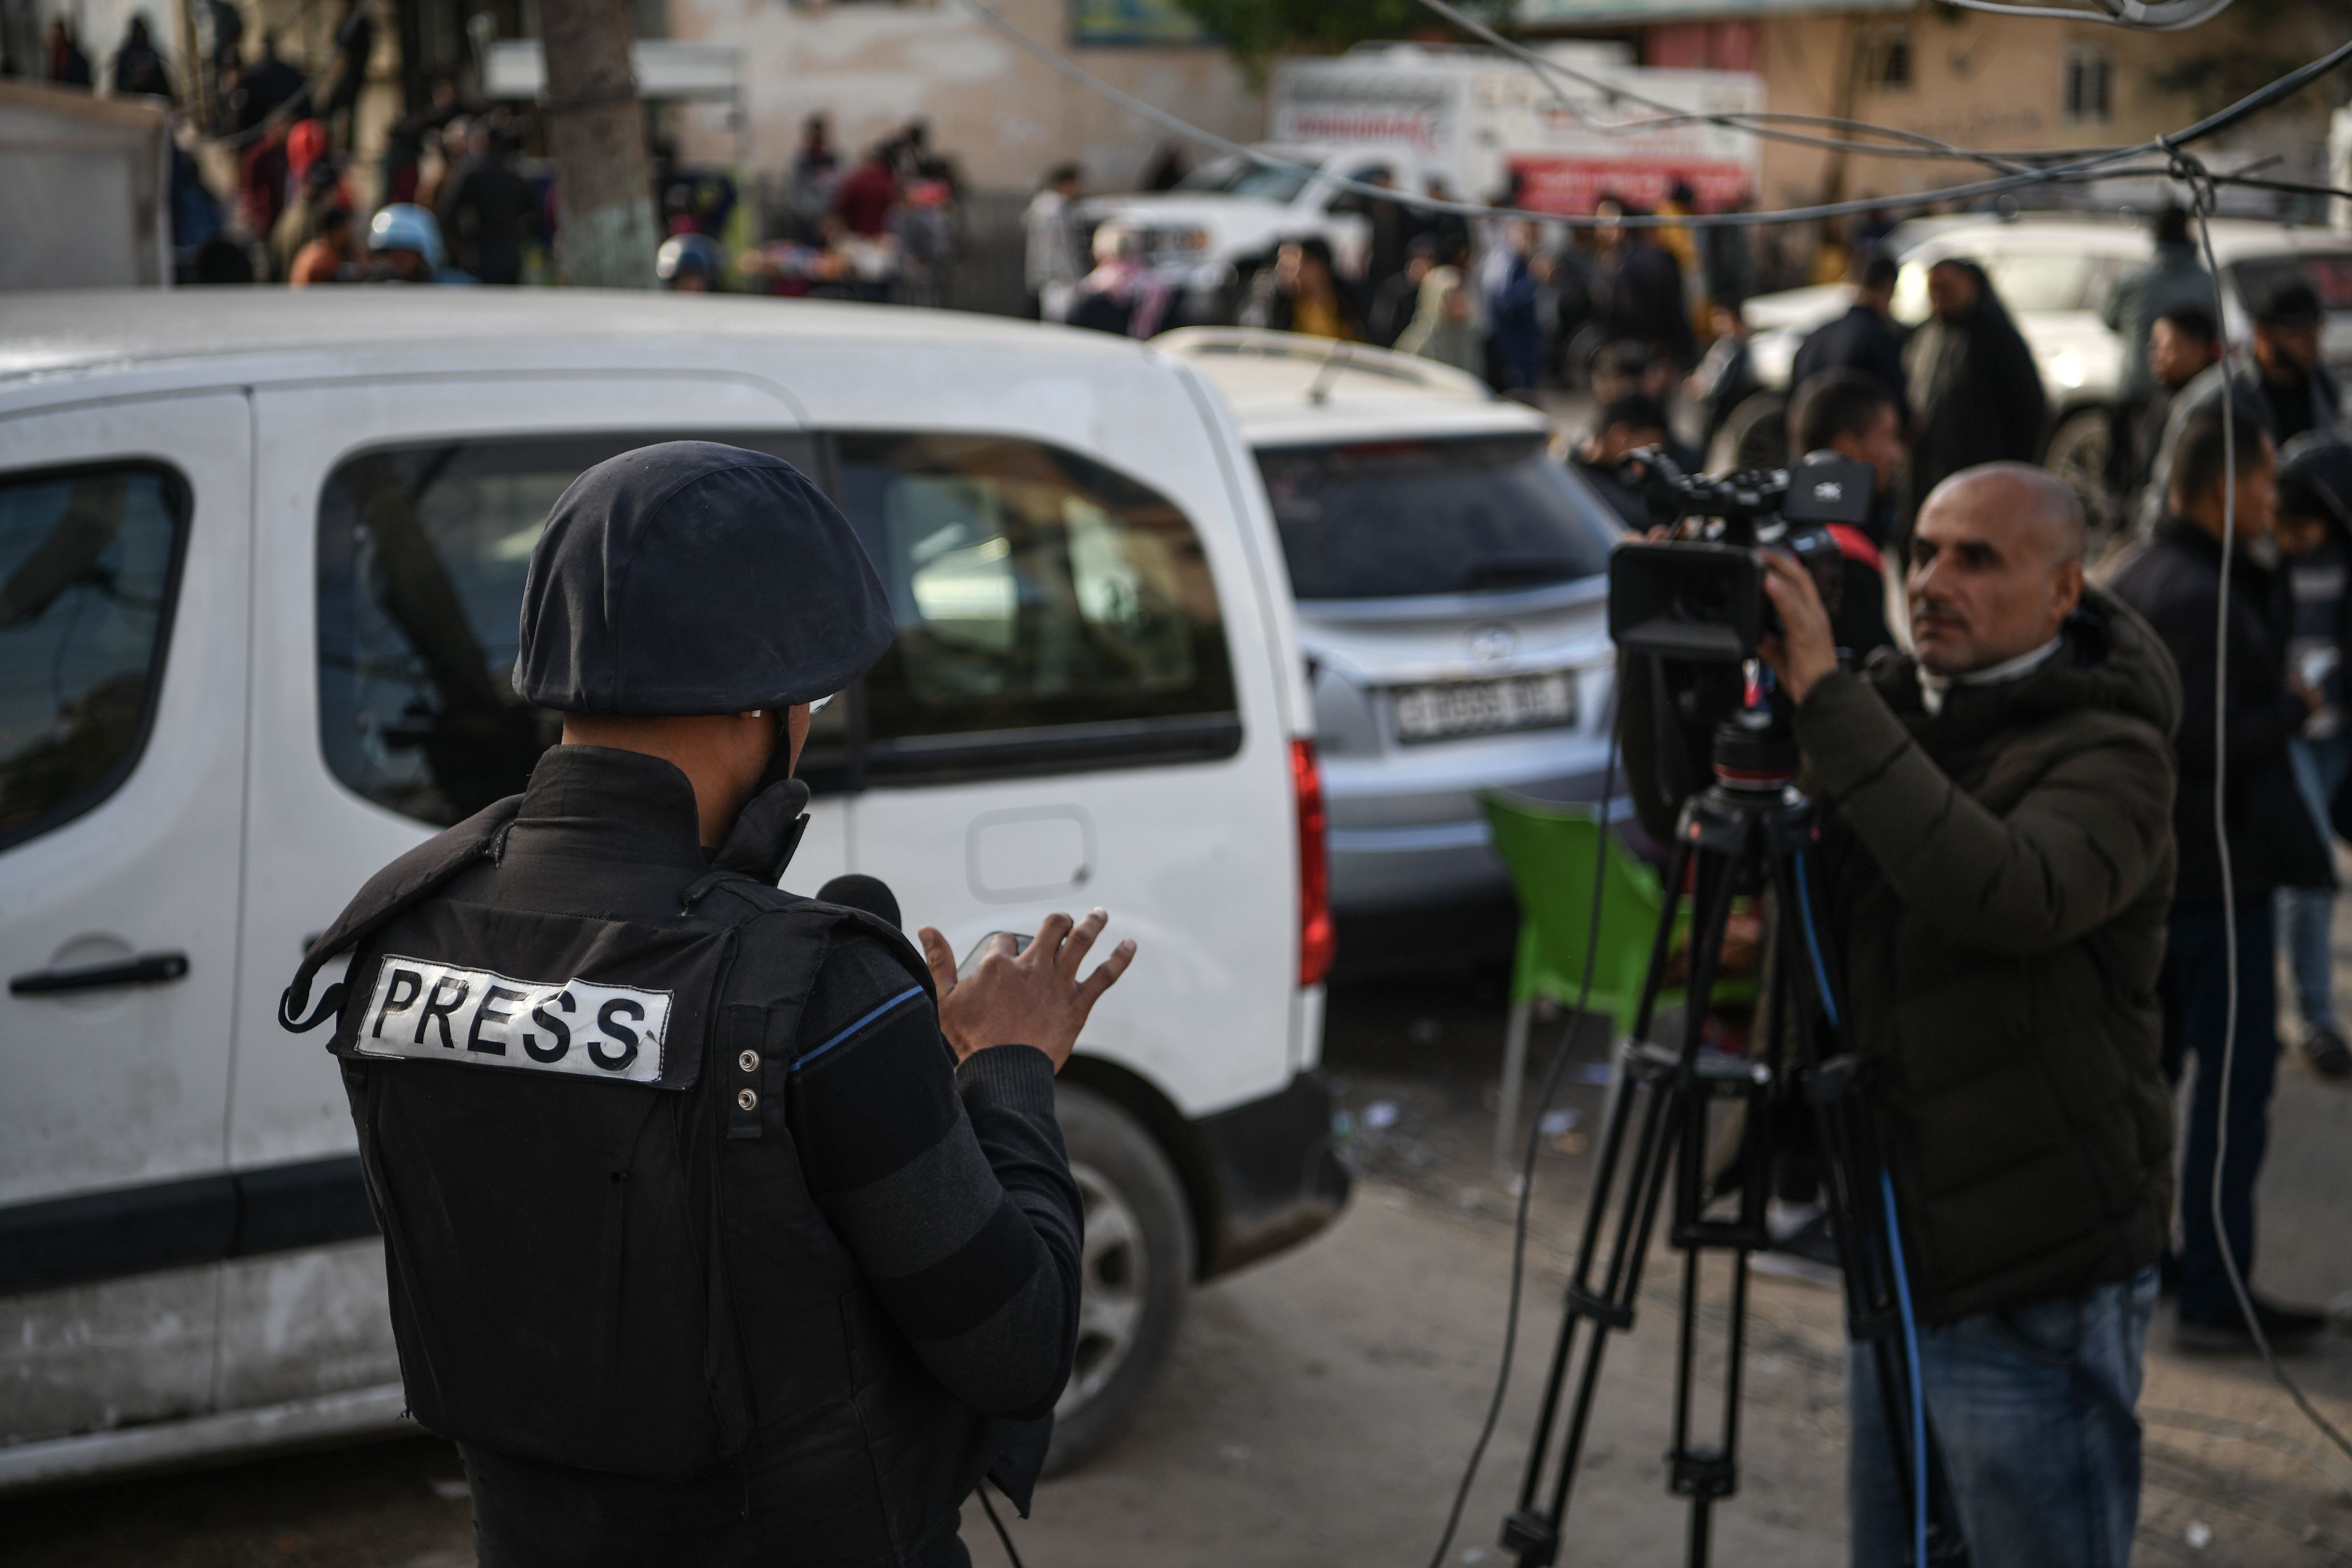 Palestinian journalists reporting in Gaza